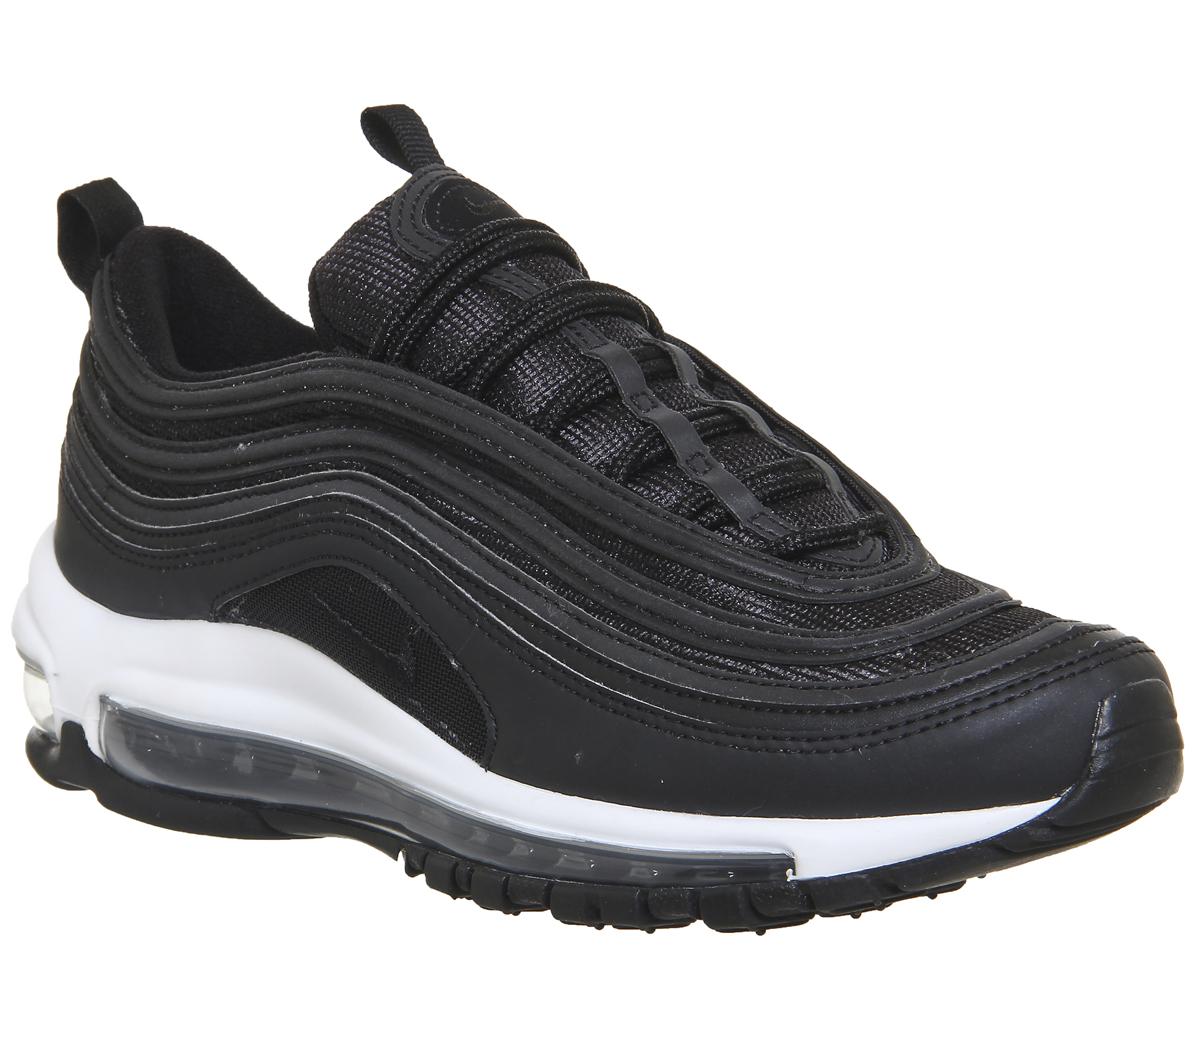 Nike Air Max 97 Trainers Black - Hers trainers